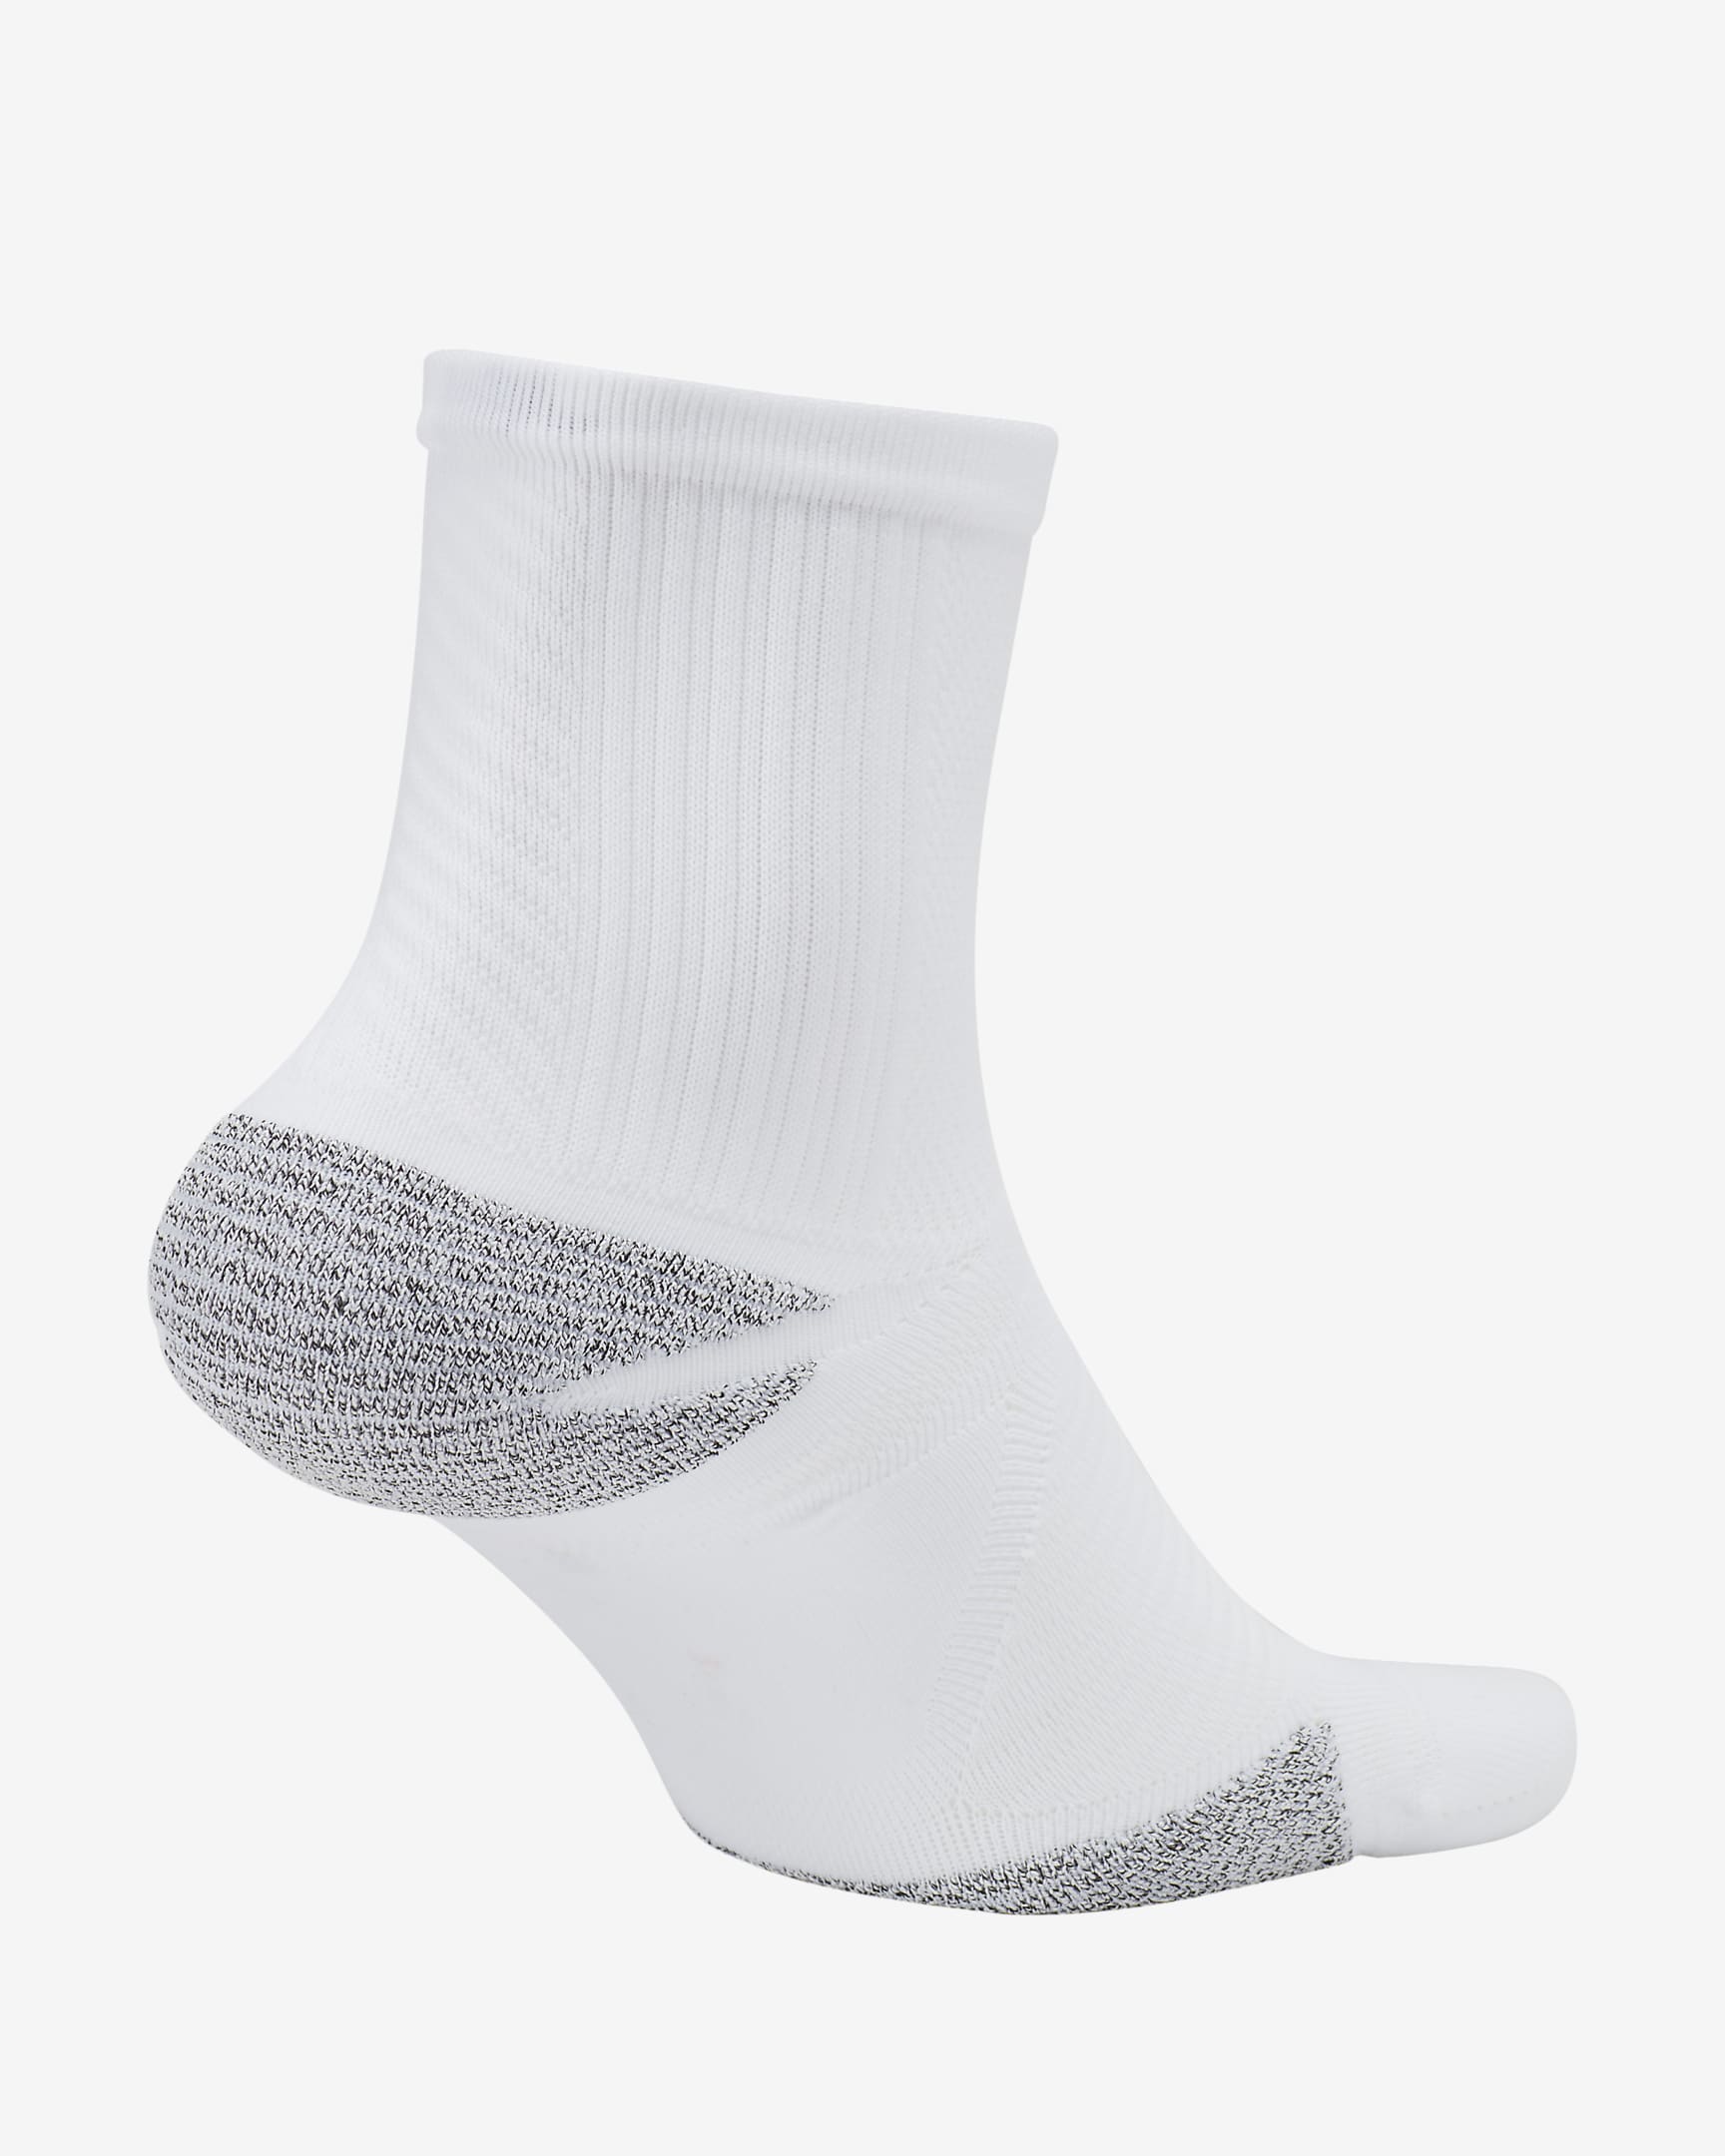 Nike Racing Ankle Socks - White/Reflect Silver